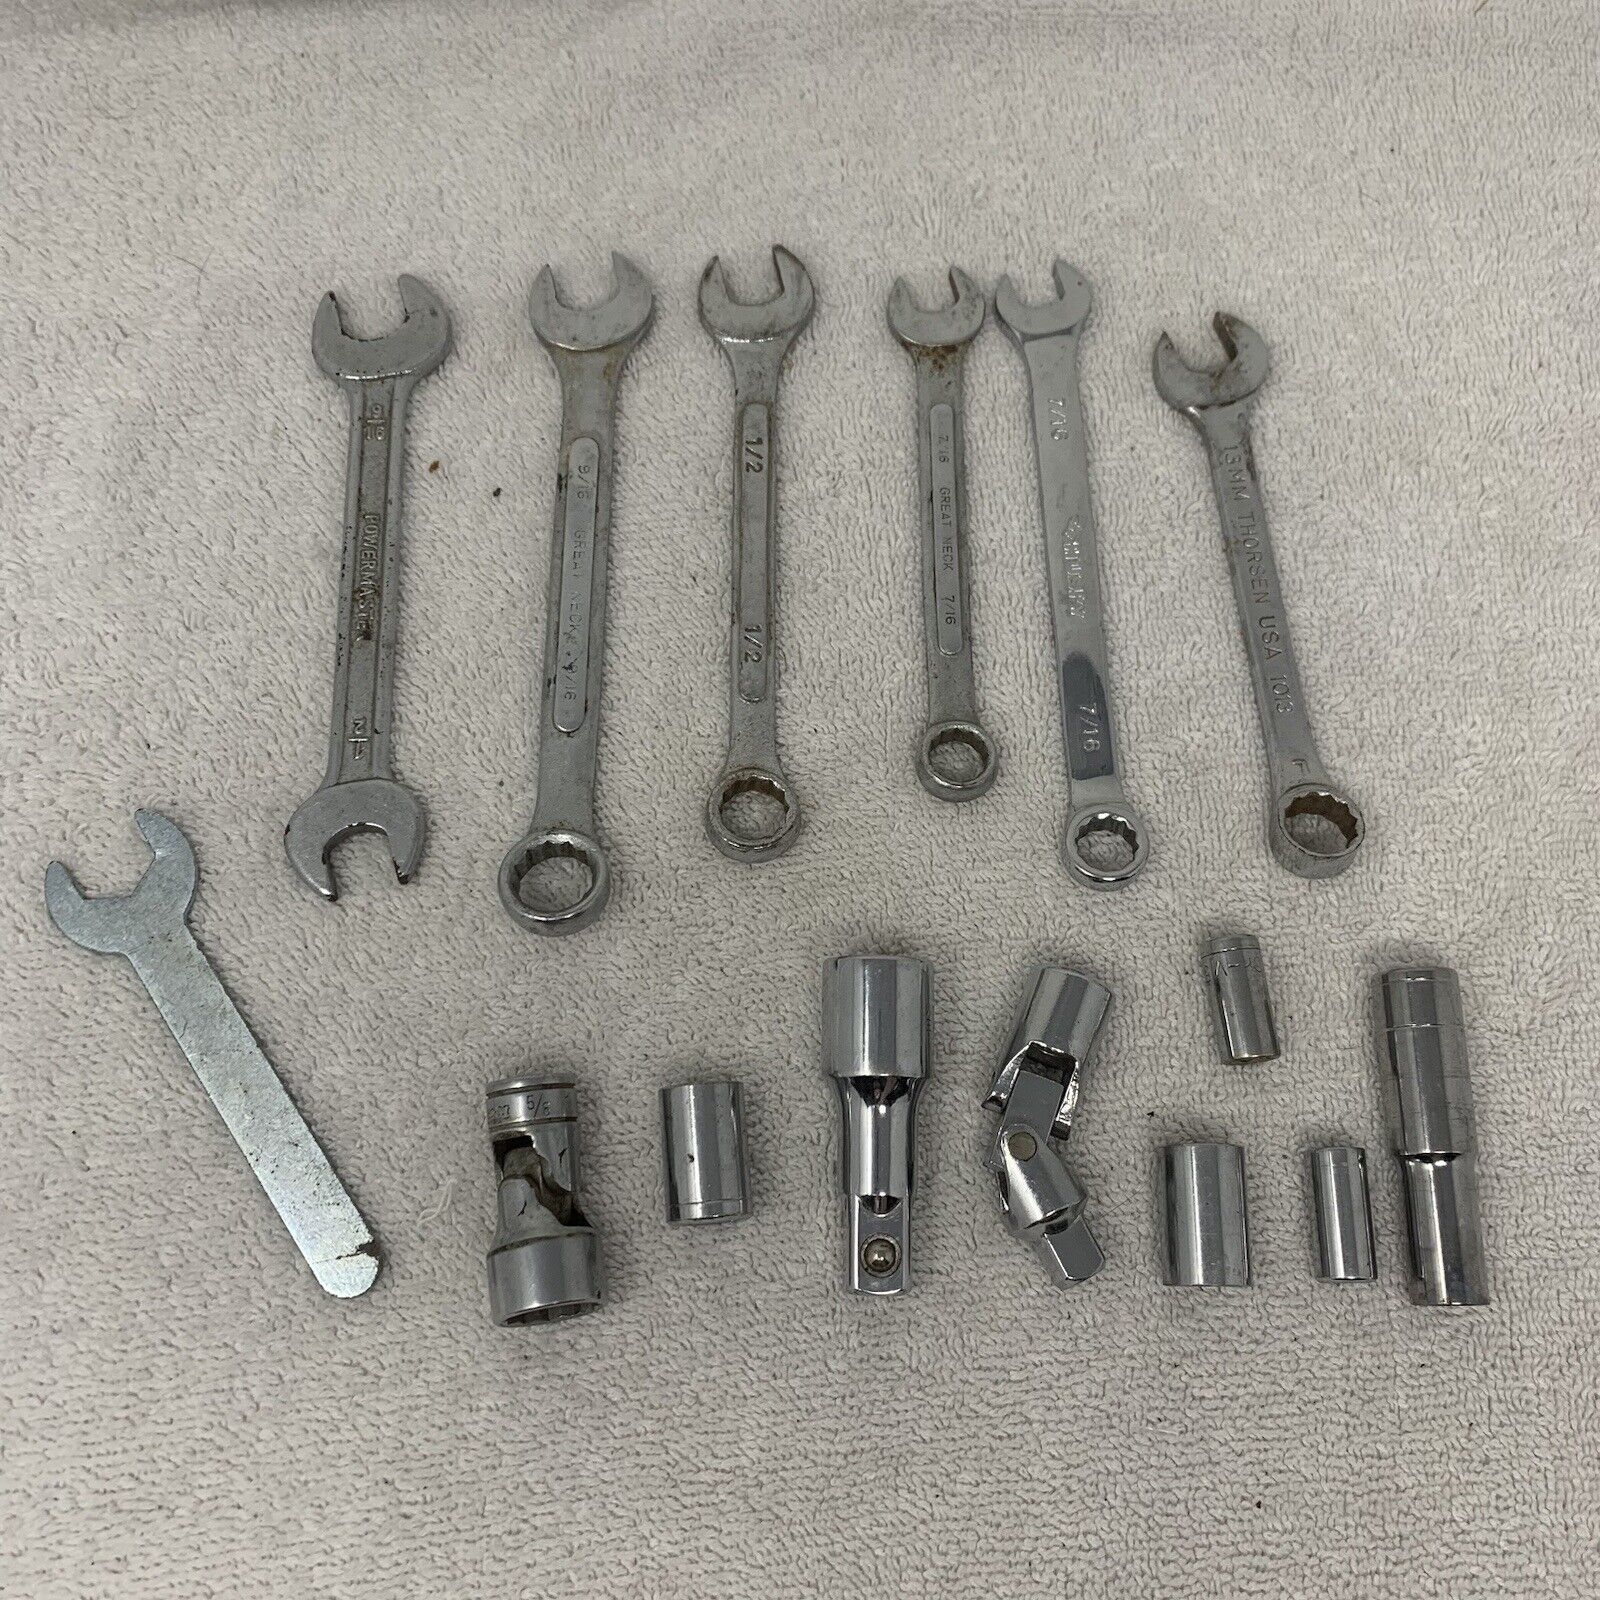 Vintage Powermaster Snap On Wrench Lot Husky Adjustable Forged in USA Bundle